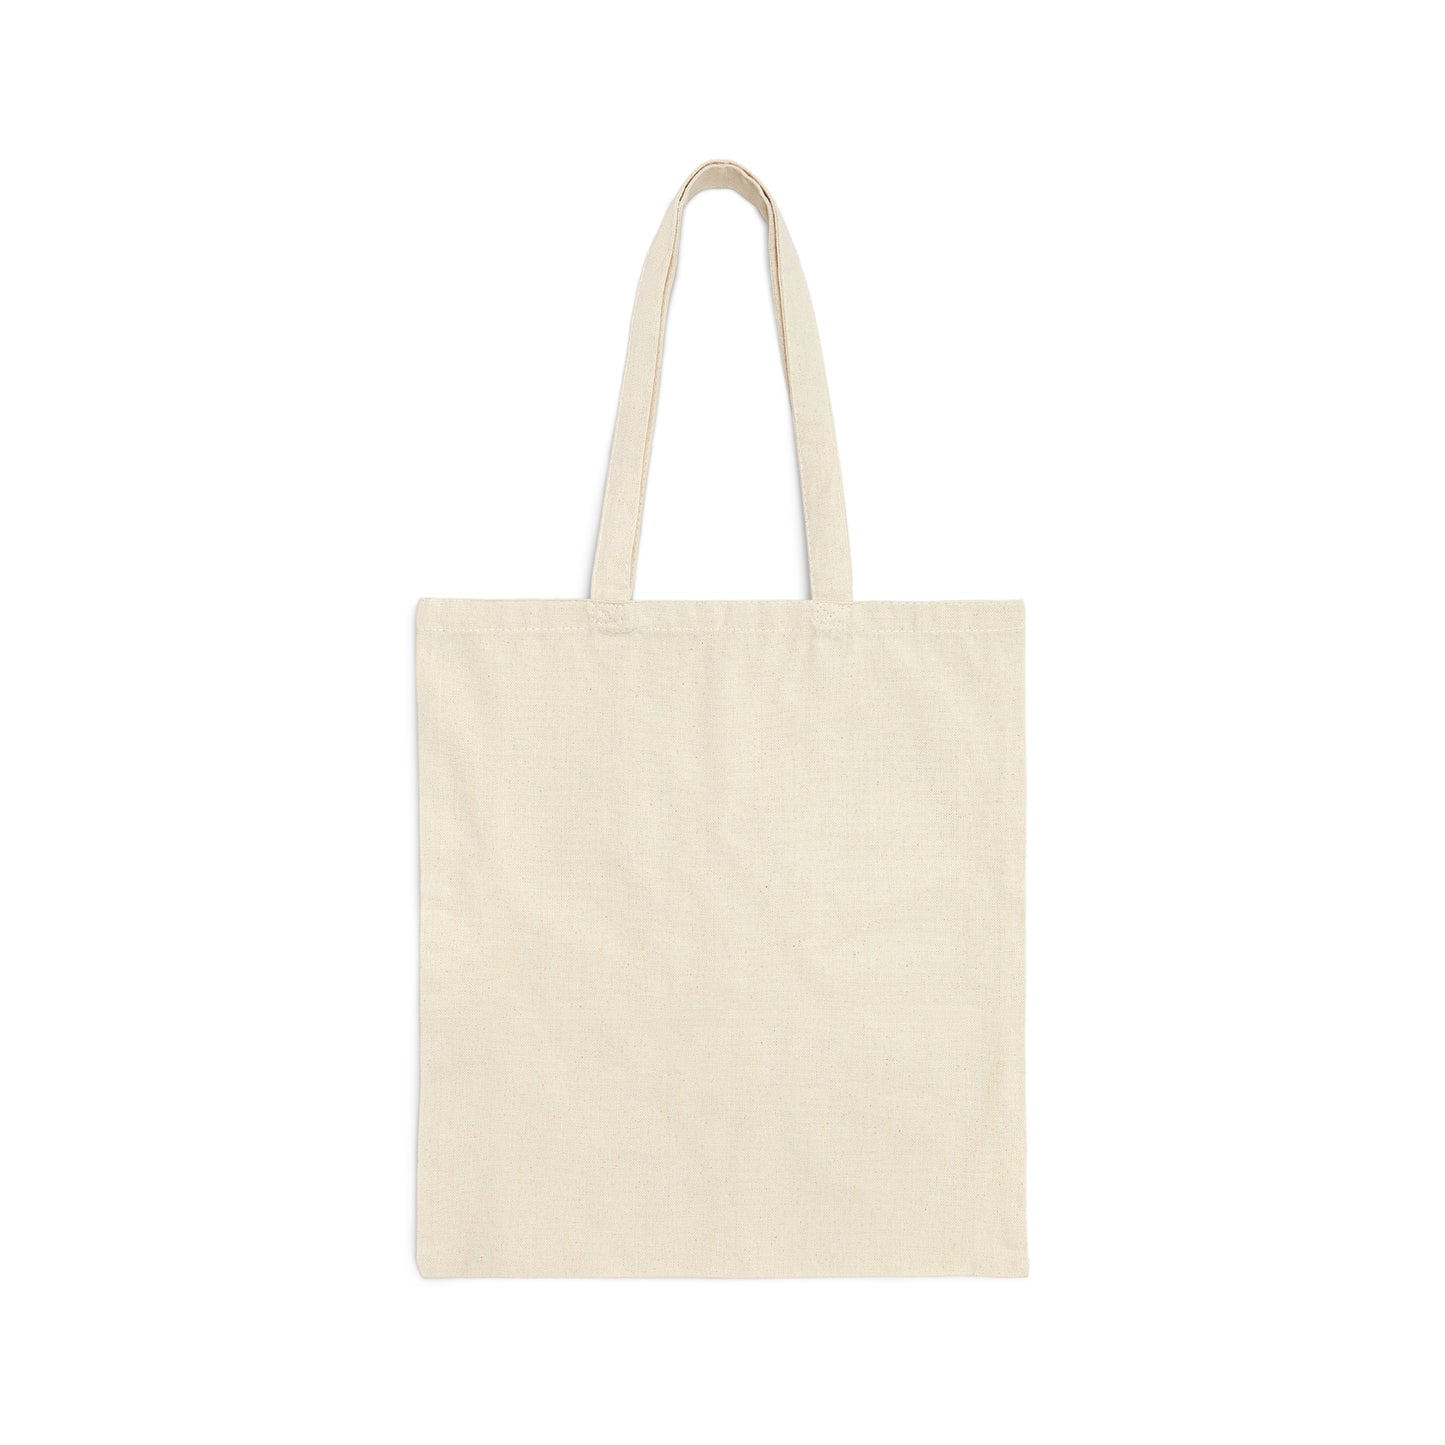 The Star, The Muse - Tote Bag